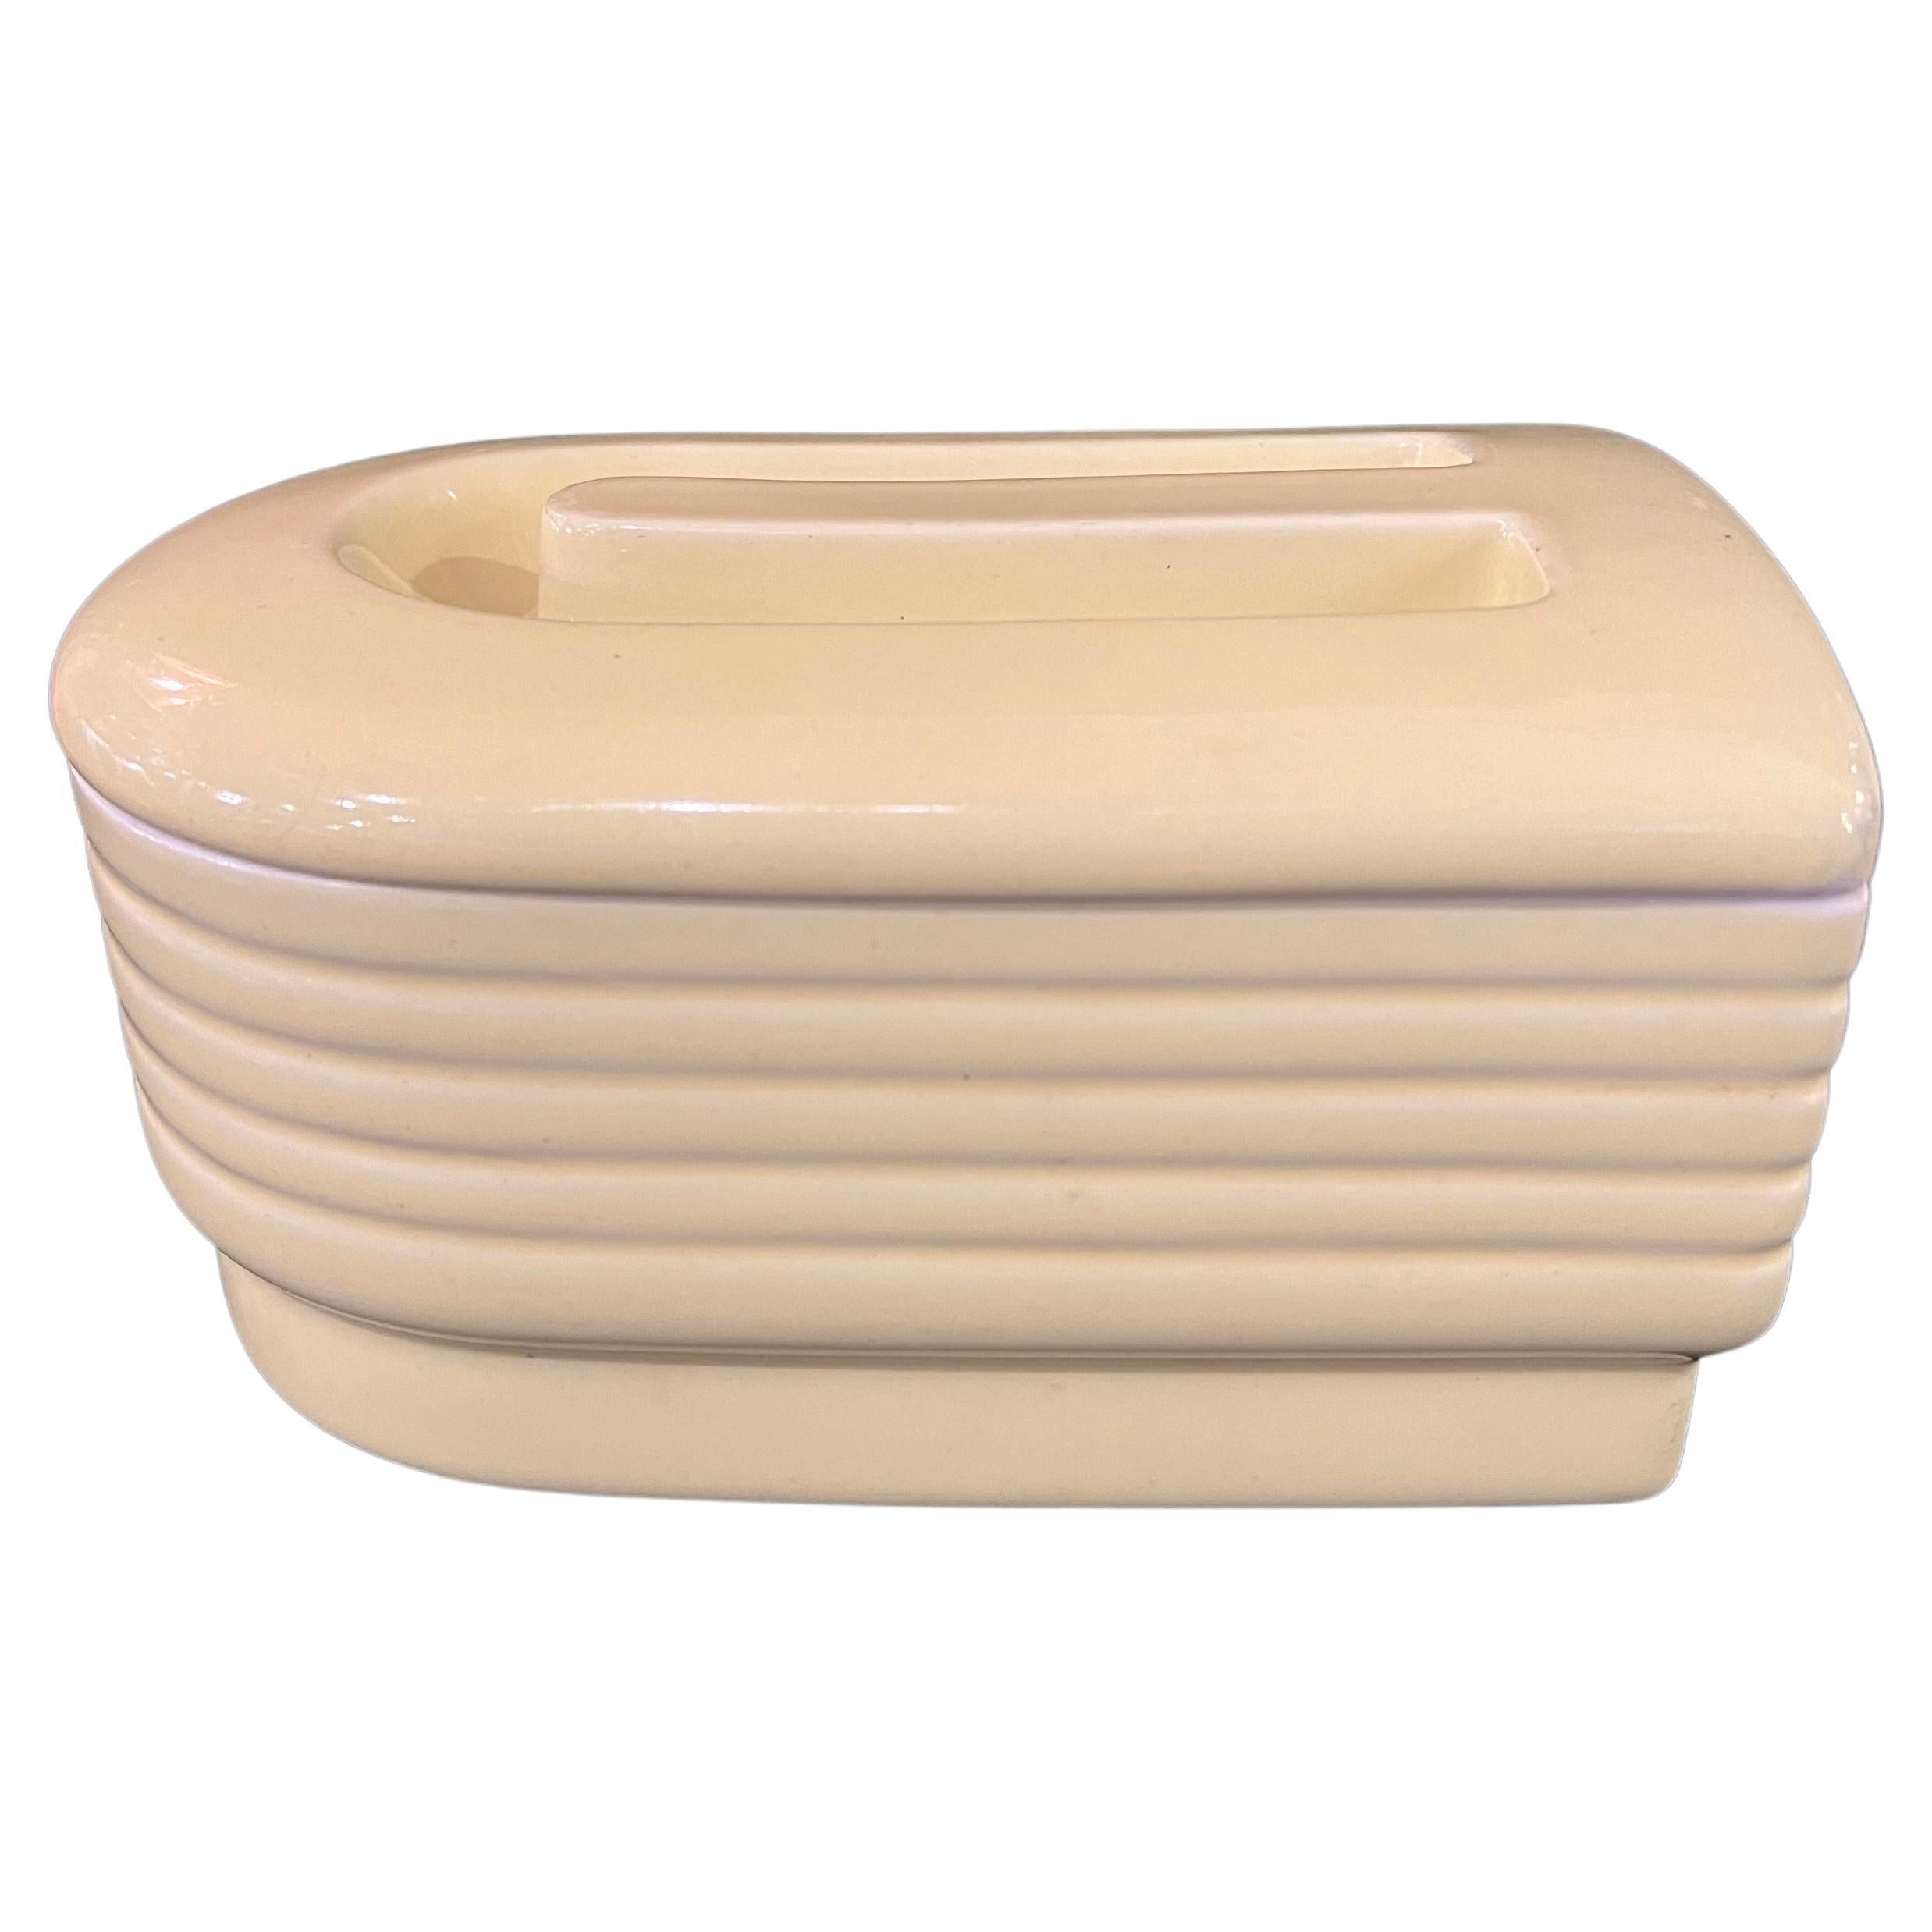 A beautiful example of American art deco design on this beautiful covered dish, excellent condition and beautiful yellow pastel color.